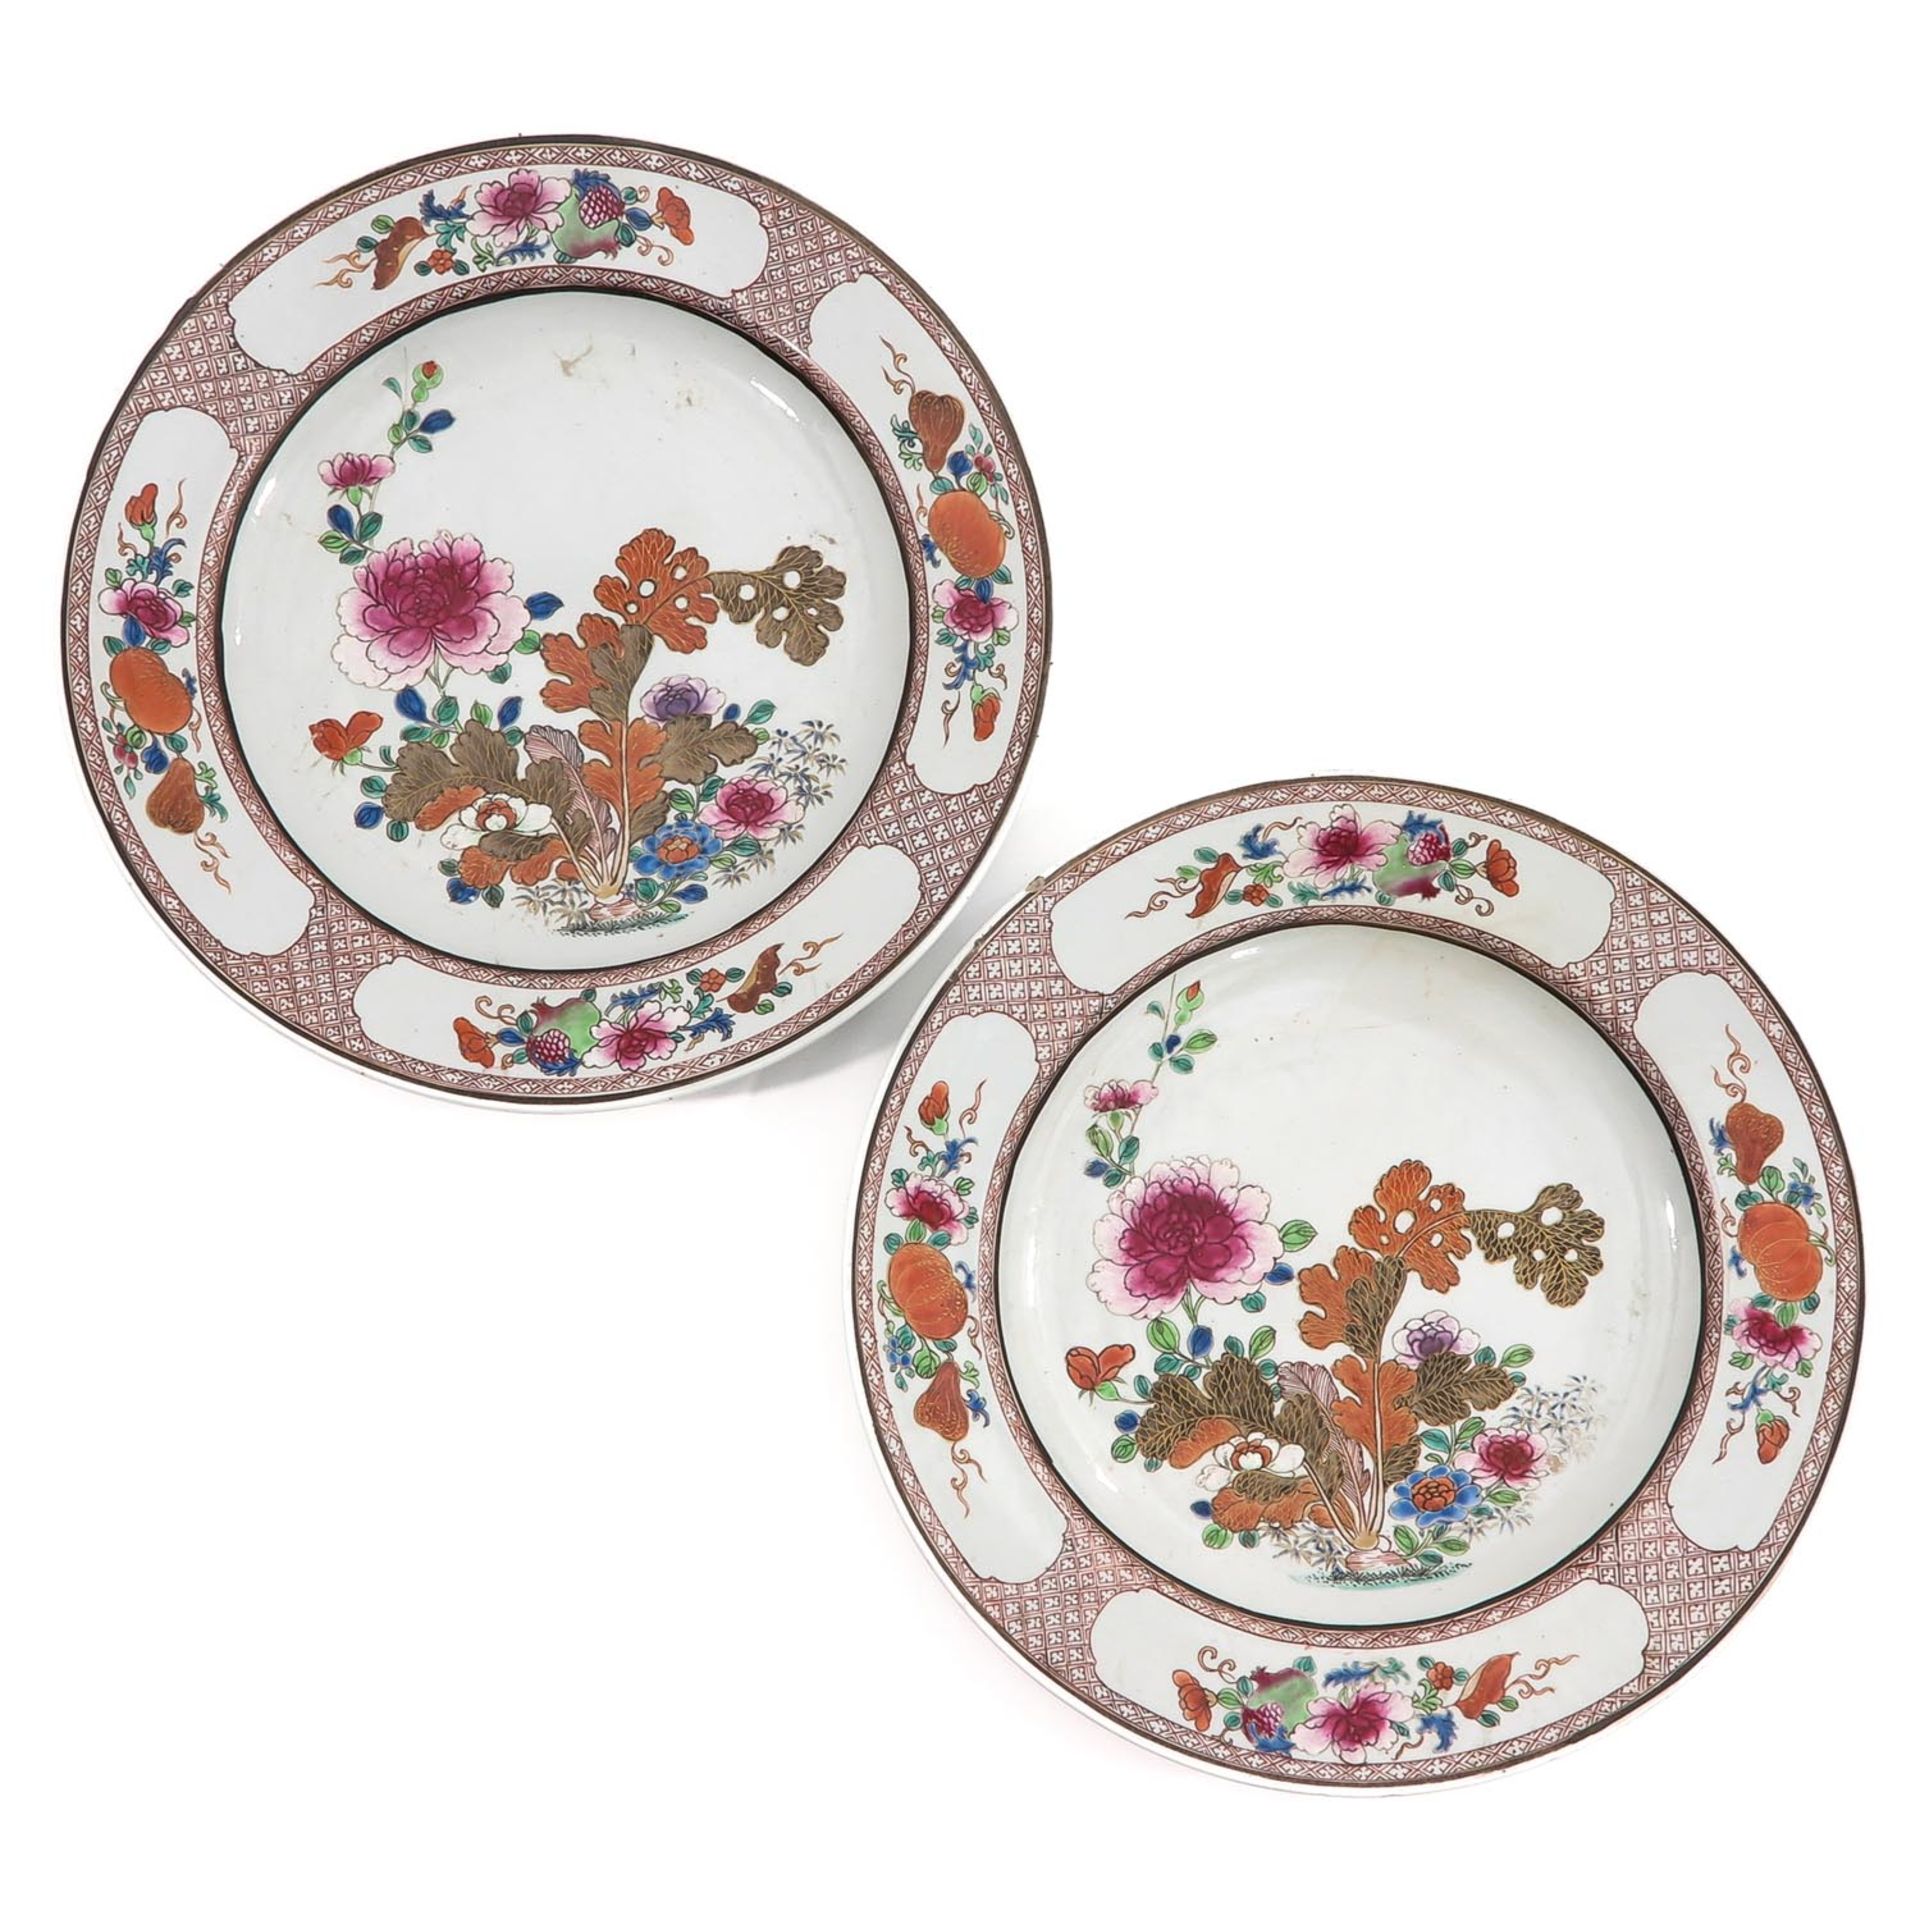 A Pair of Famille Rose Chargers